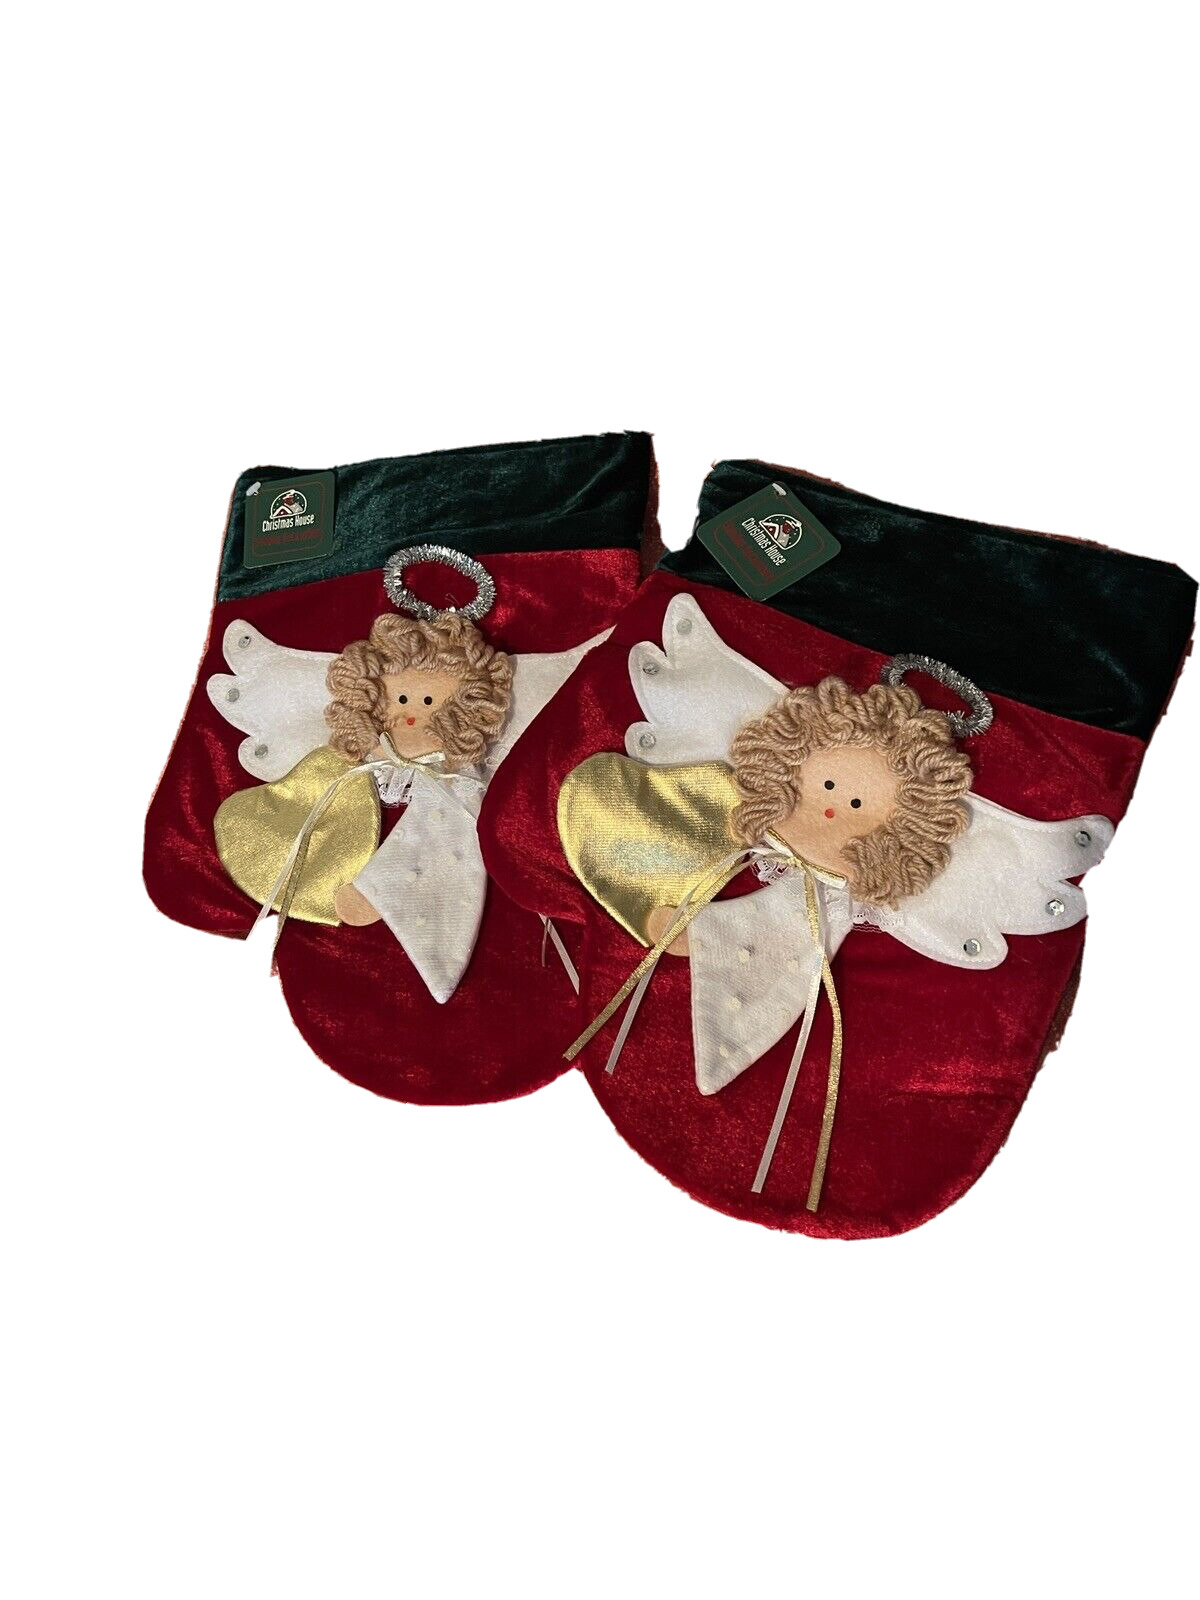 Angel Christmas Mitten Vintage Holiday Decor Set of 2 Mittens New With Tags